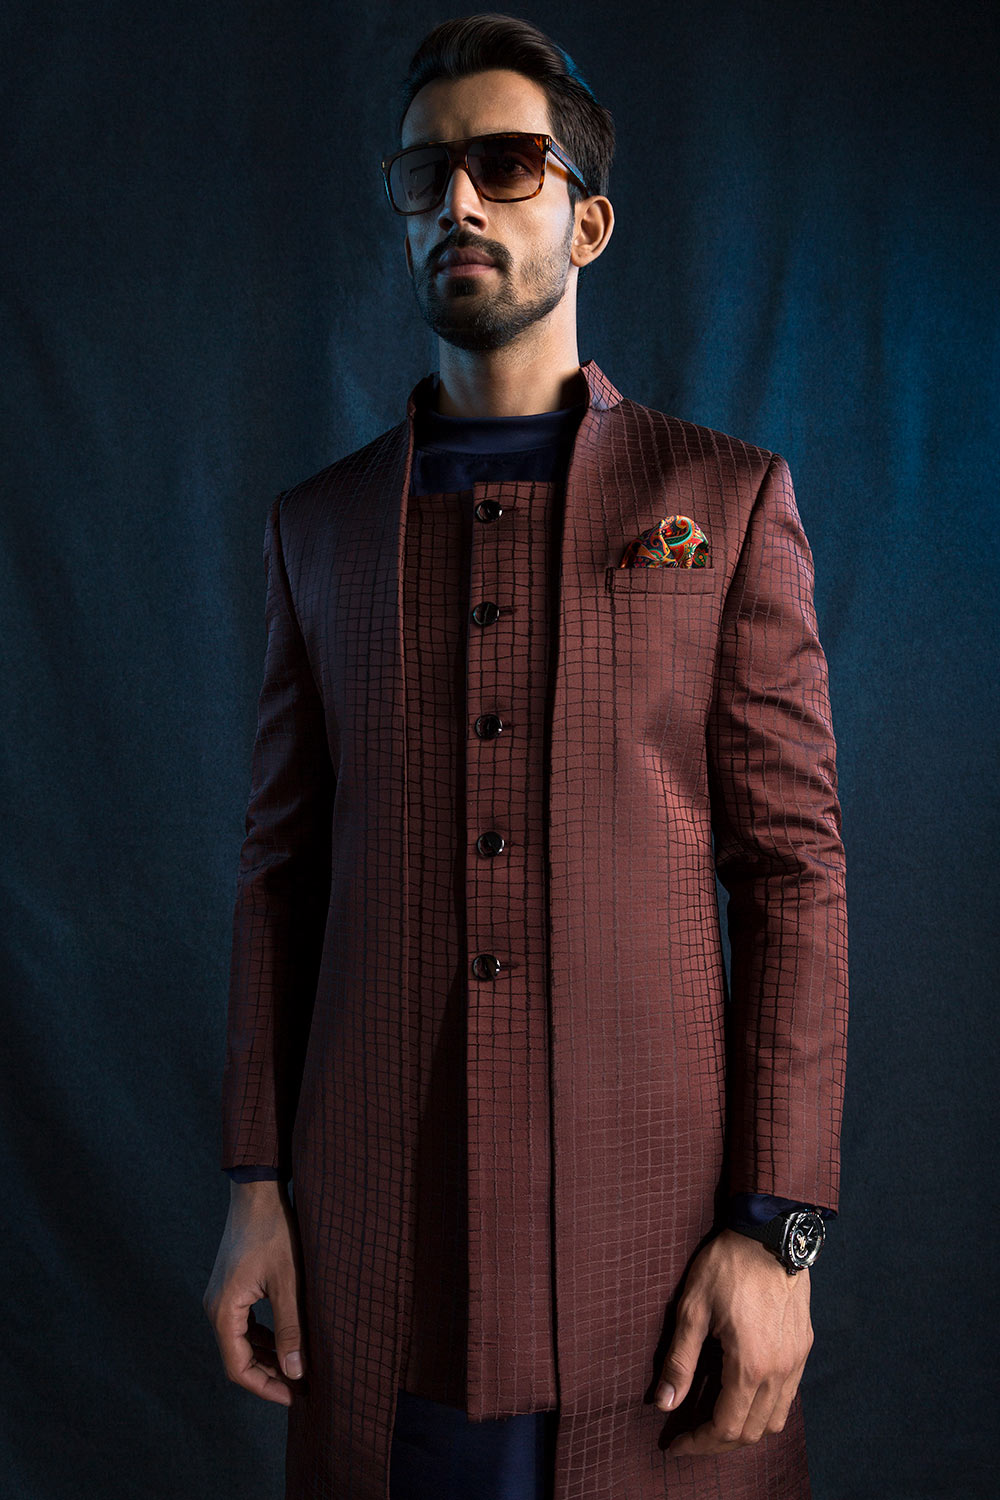 Maroon suit | Costume mariage, Costume homme mariage, Tenue mariage homme-tuongthan.vn